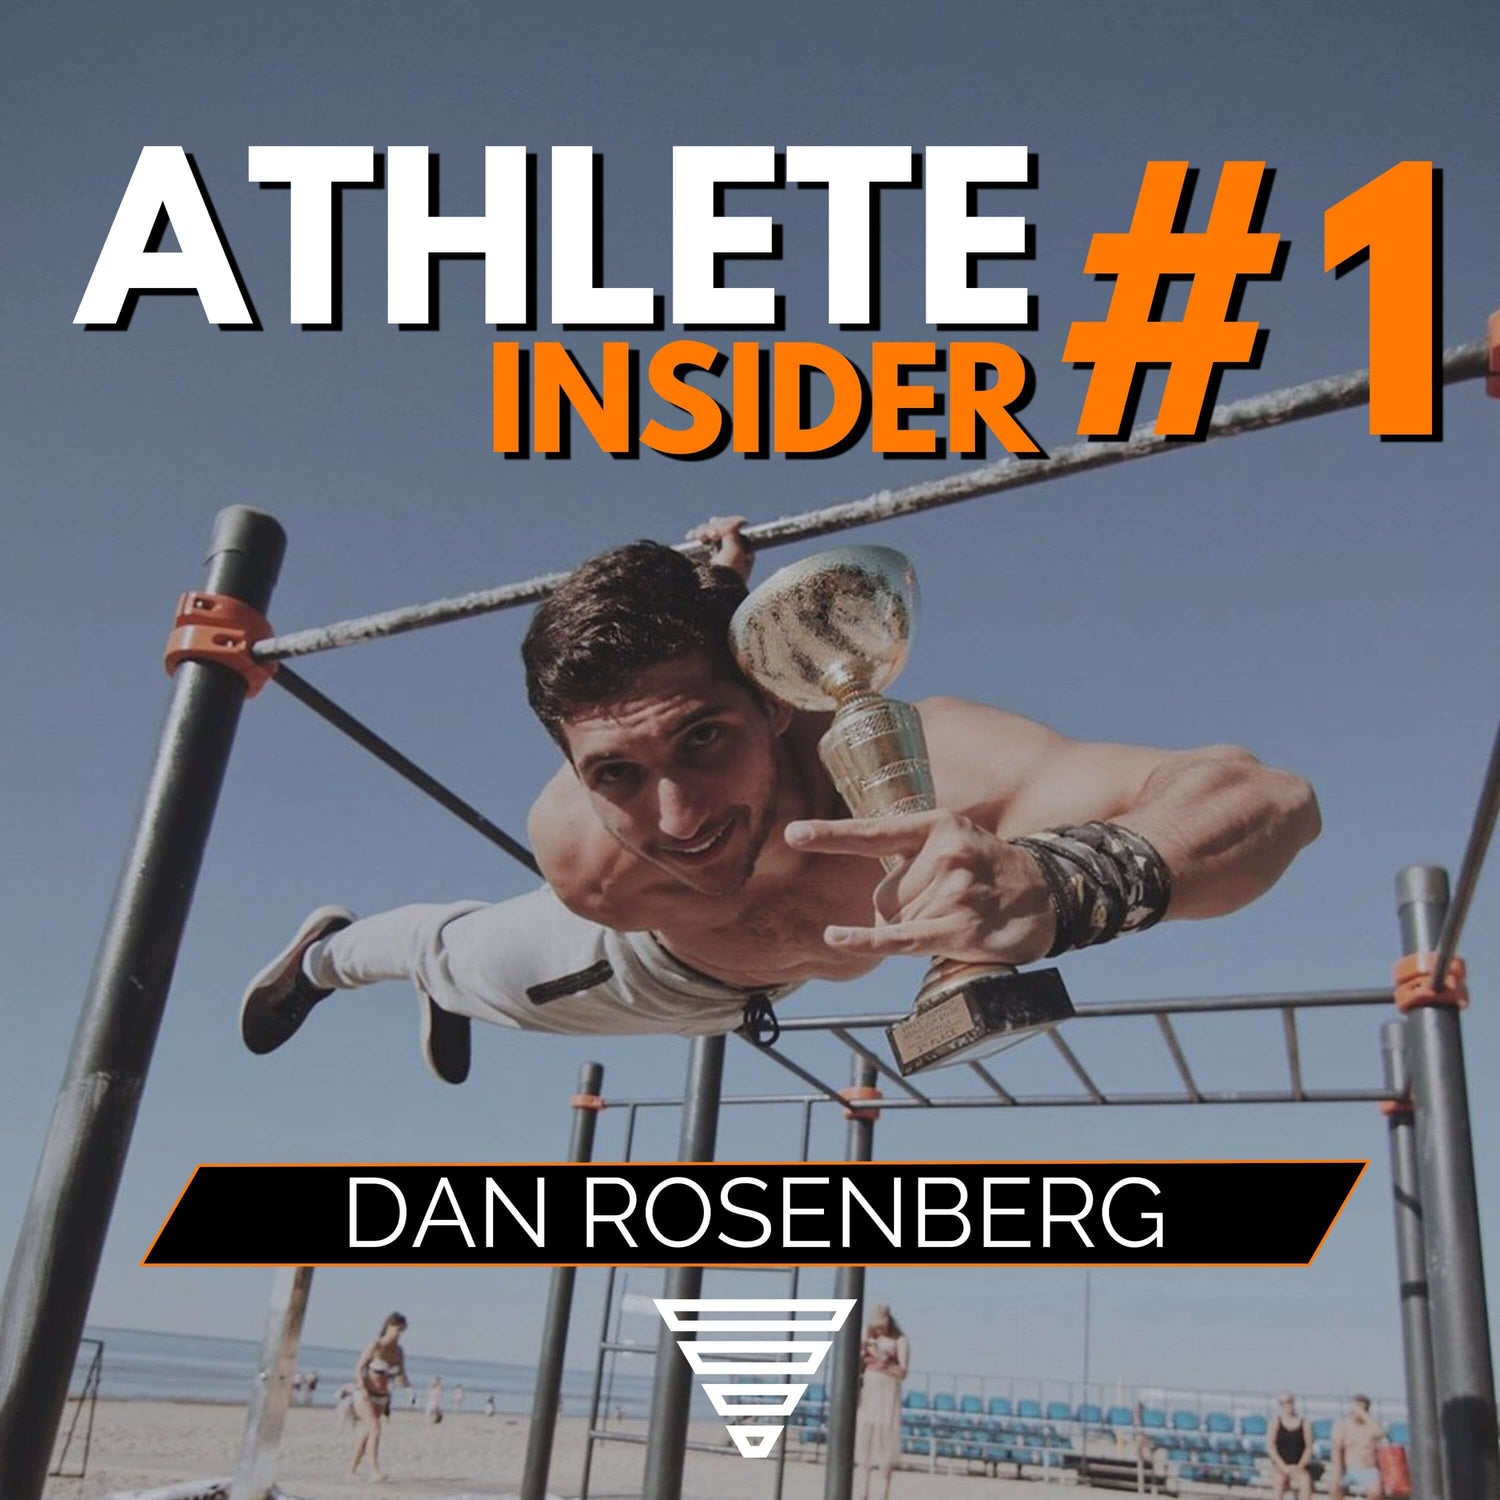 Inside Dan Rosenberg's mind - Interview with the professional calisthenics athlete from Israel - The Athlete Insider Podcast